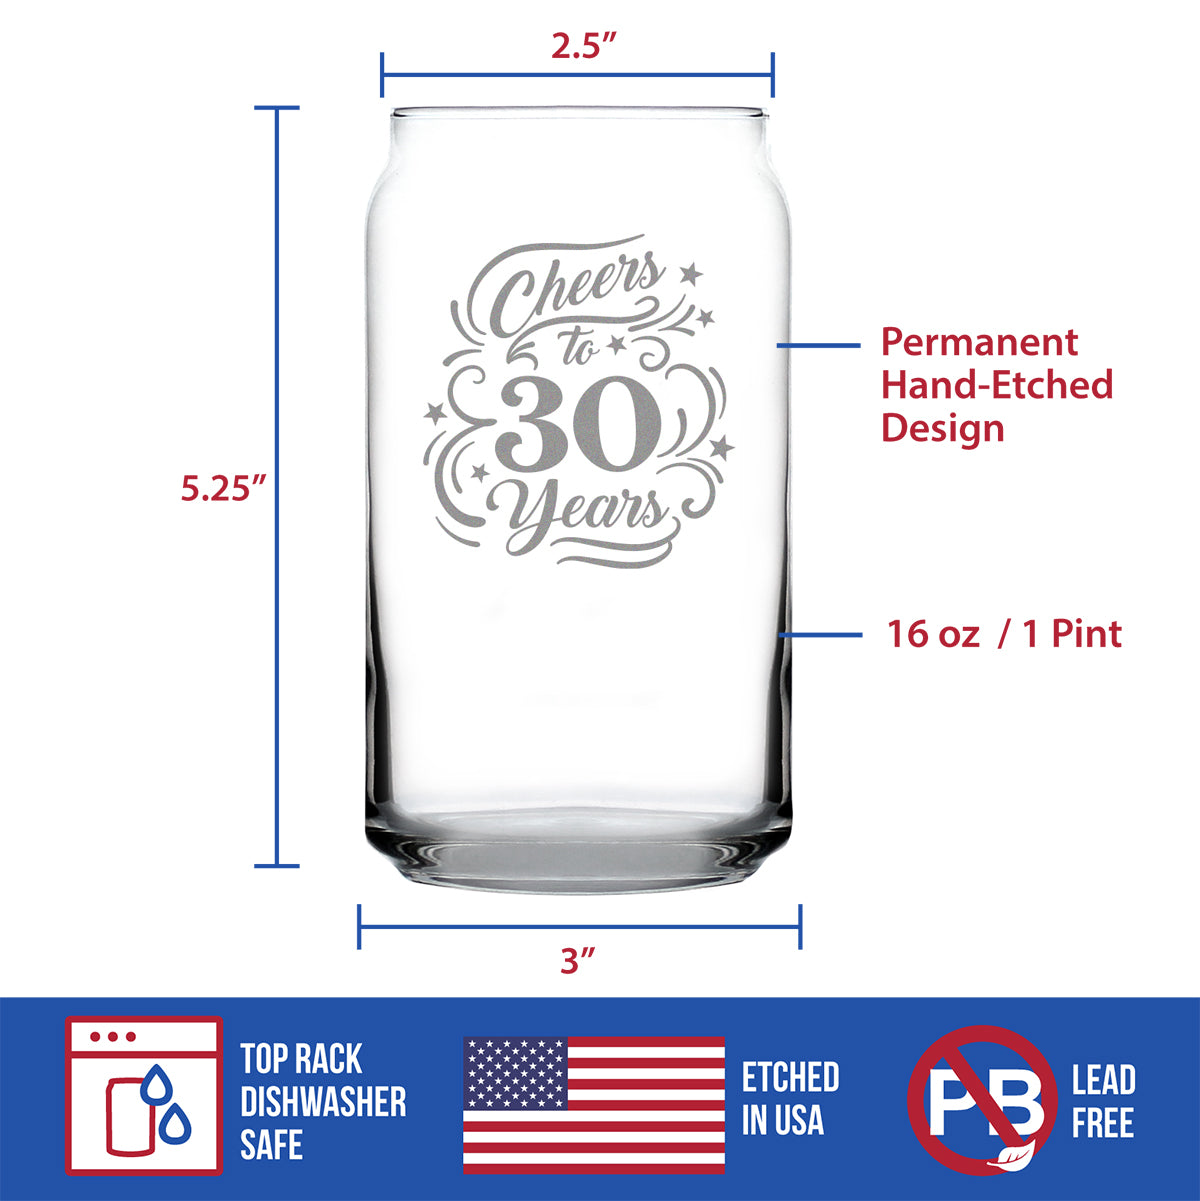 Cheers to 30 Years - Beer Can Pint Glass Gifts for Women &amp; Men - 30th Anniversary Party Decor - 16 Oz Glasses